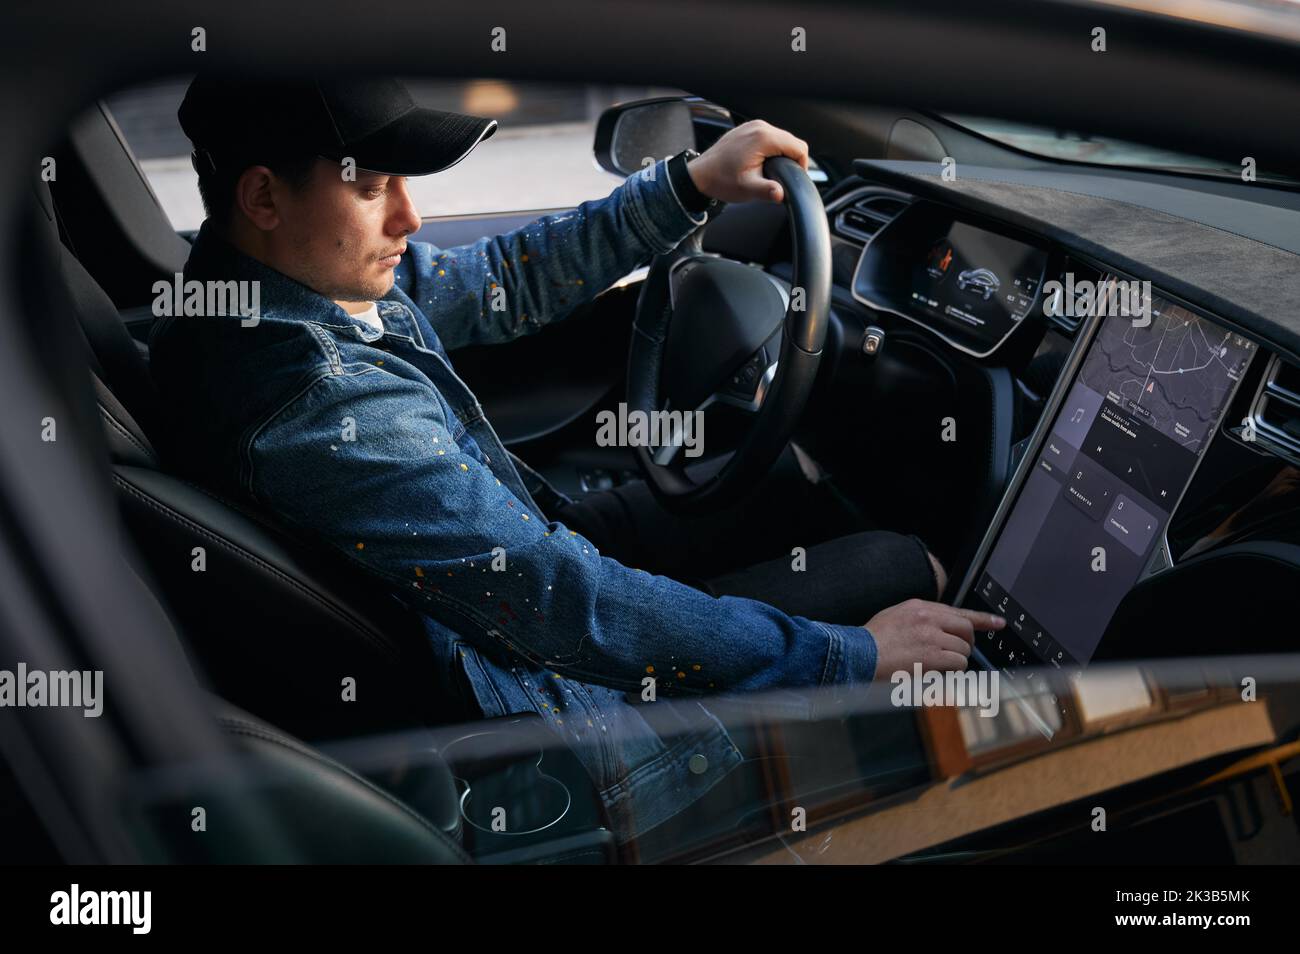 View through open side electric car window. Man in cap sitting in elite automobile, putting one hand on steering wheel and by other hand entering destination address on large touch screen. Stock Photo